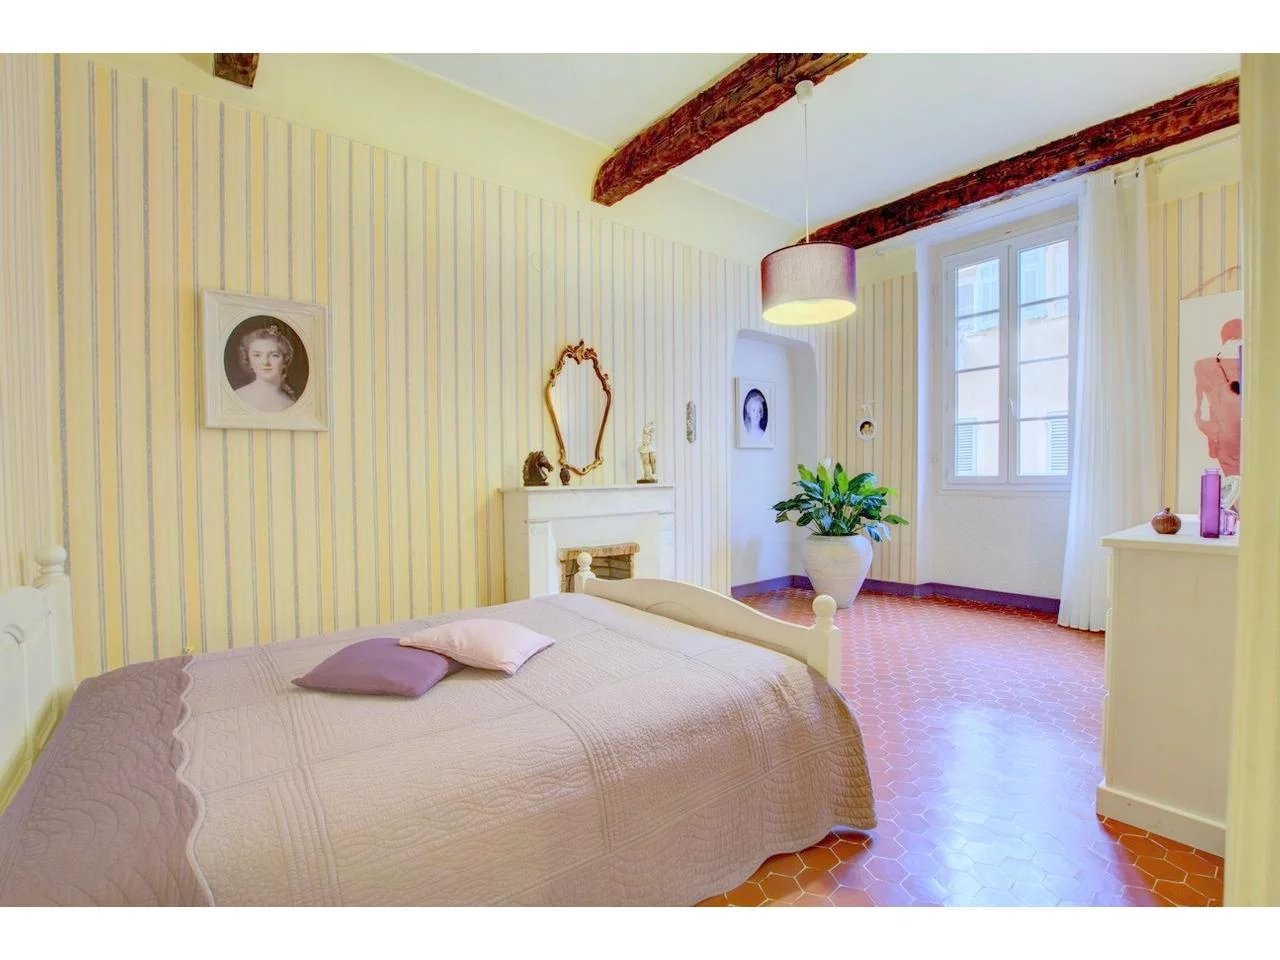 Appartement  3 Rooms 83m2  for sale   538 000 €